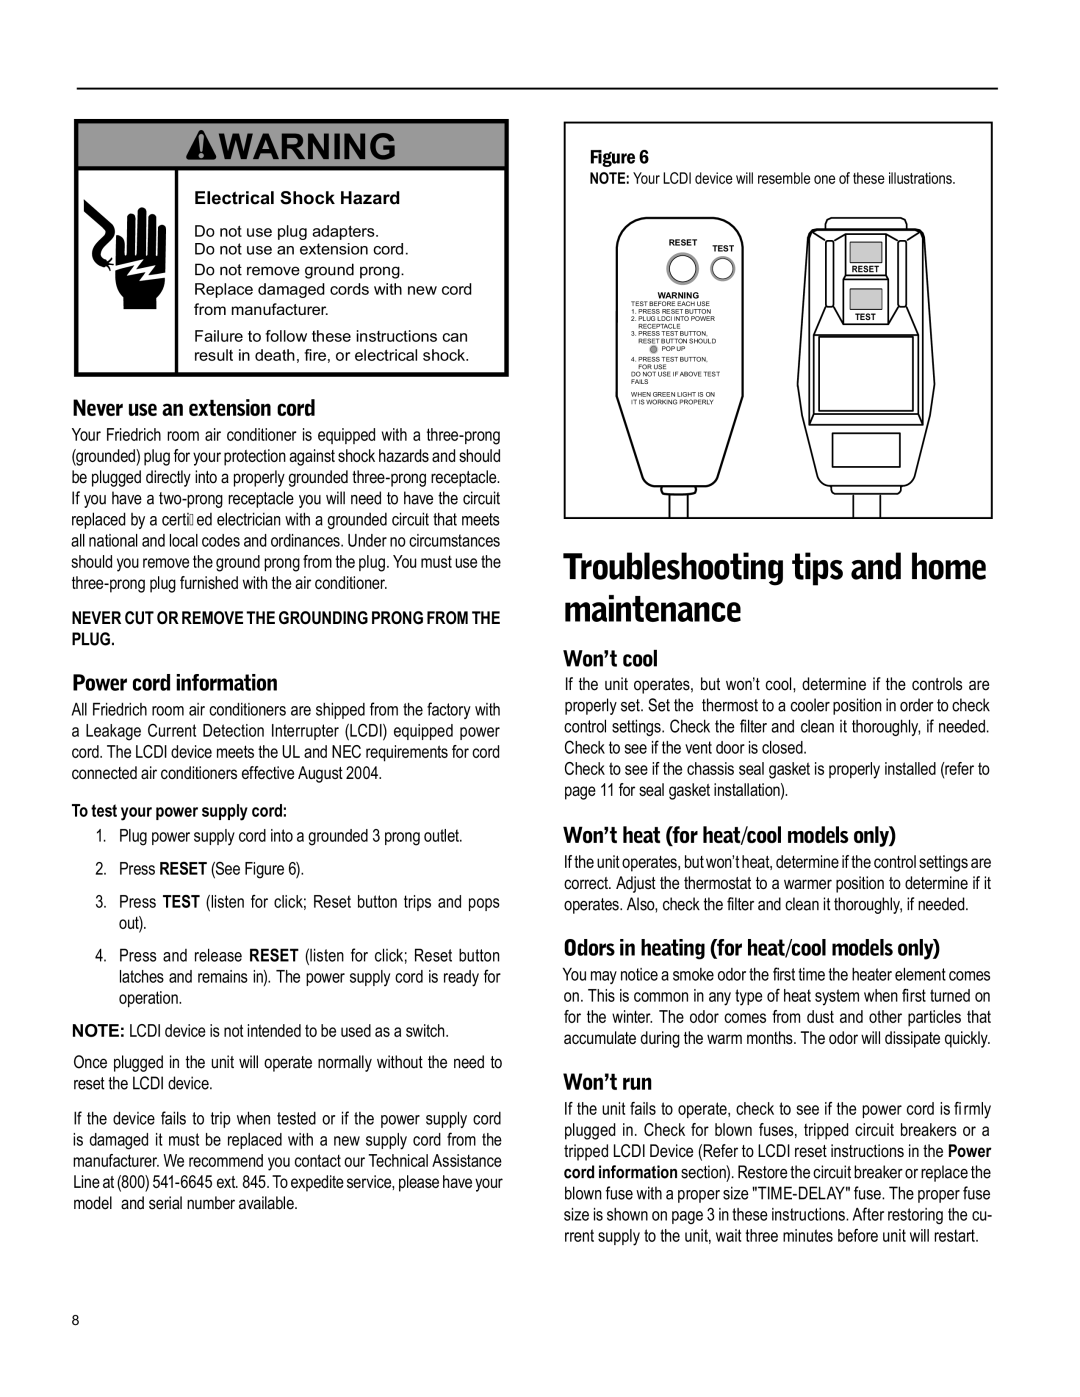 Friedrich WS12 Troubleshooting tips and home maintenance, Never use an extension cord, Power cord information, Won’t cool 